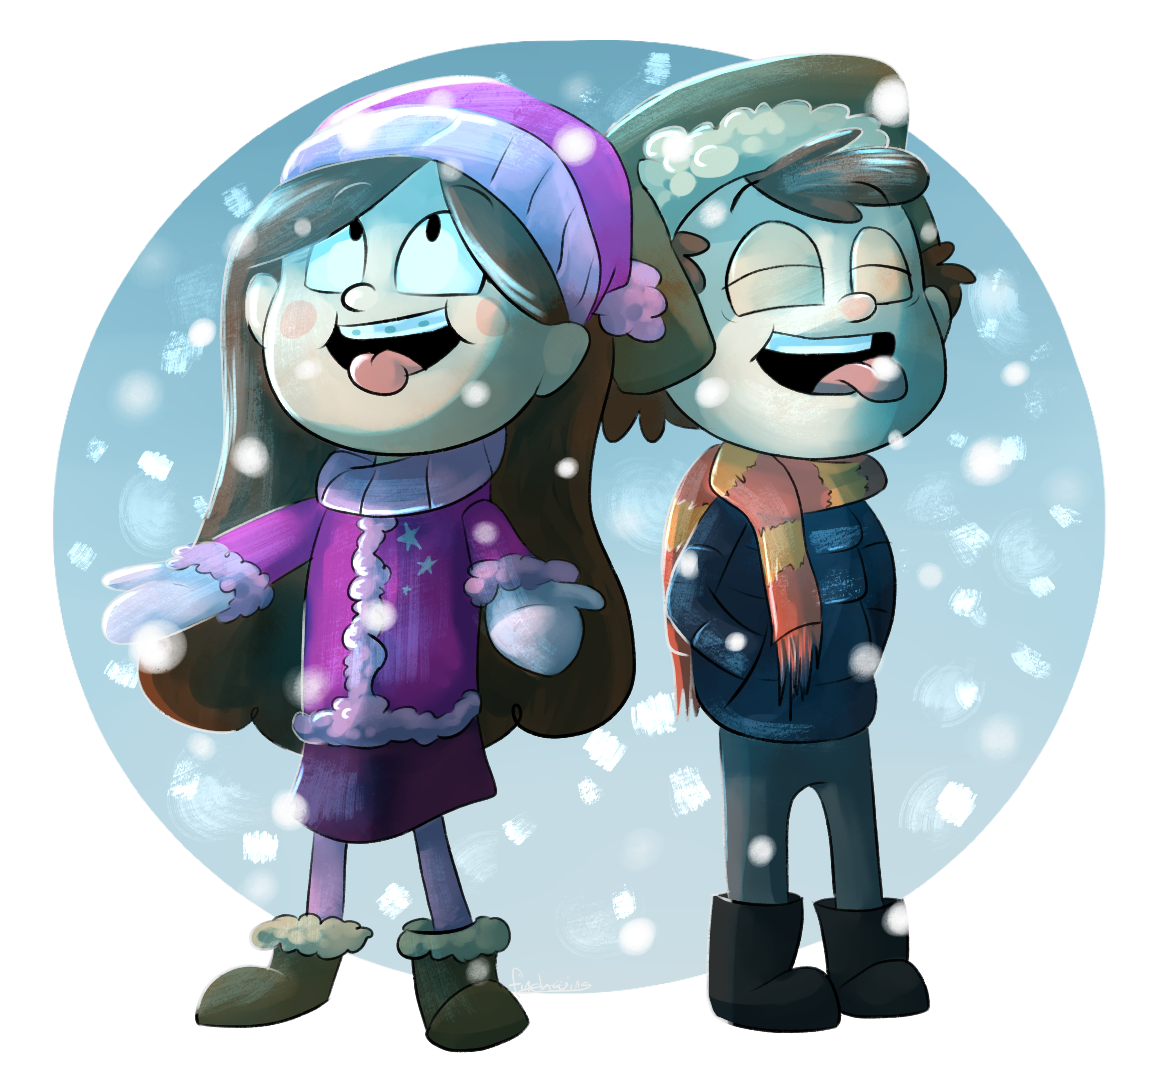 finch-wing:
“ Have some Pines twins in the winter
totally not inspired by this what are you talking about
”